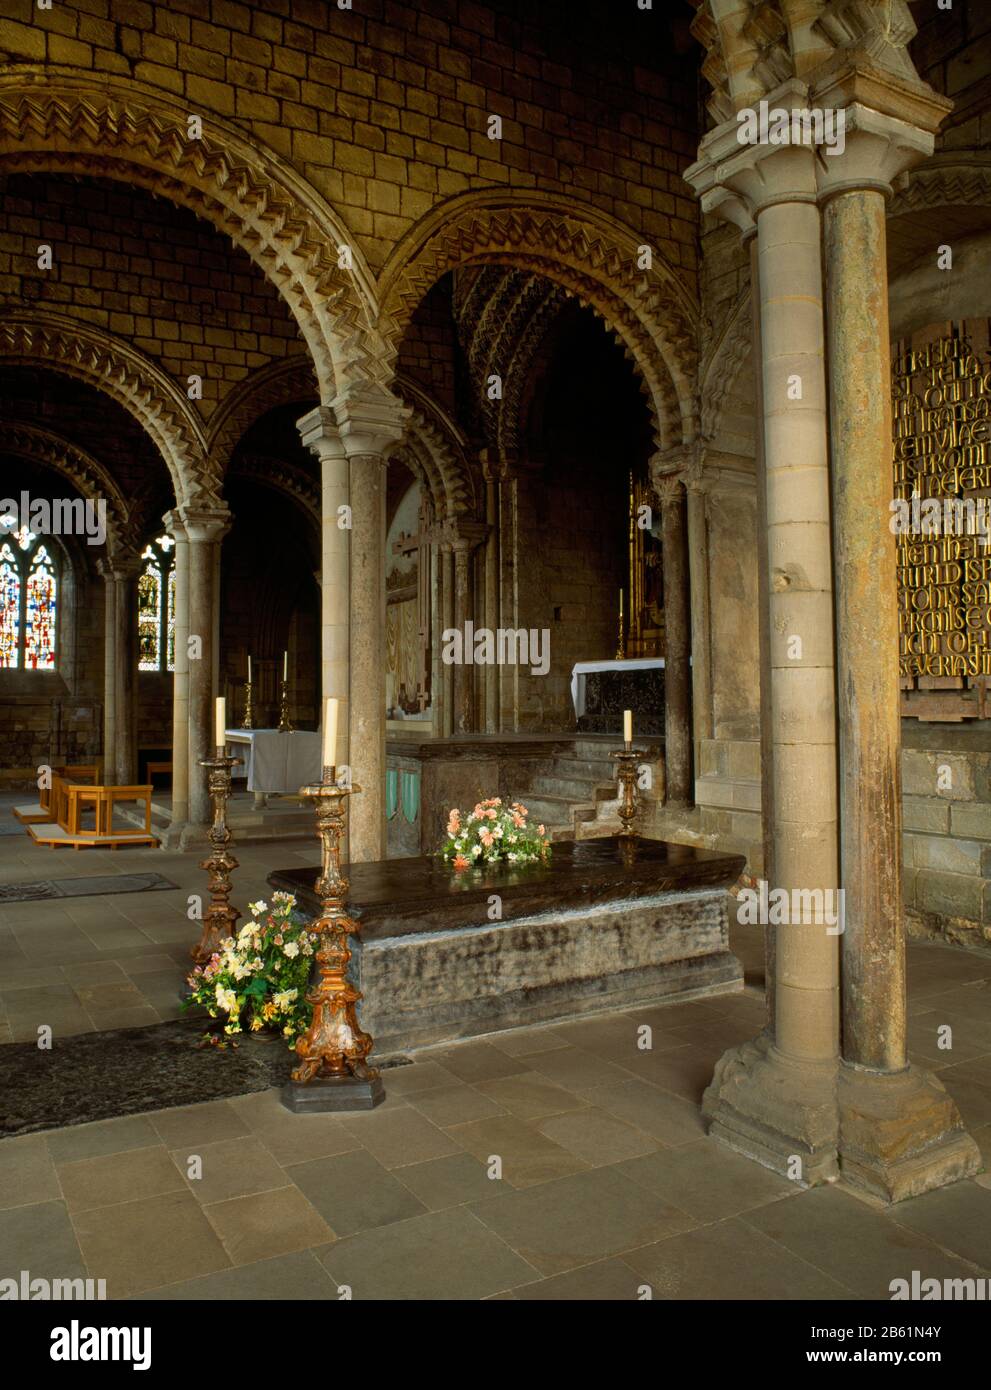 Tomb of the Venerable Bede in the Galilee Chapel at the W end of Durham Cathedral, England, UK. Monk & historian Bede died in 735 at Jarrow monastery. Stock Photo